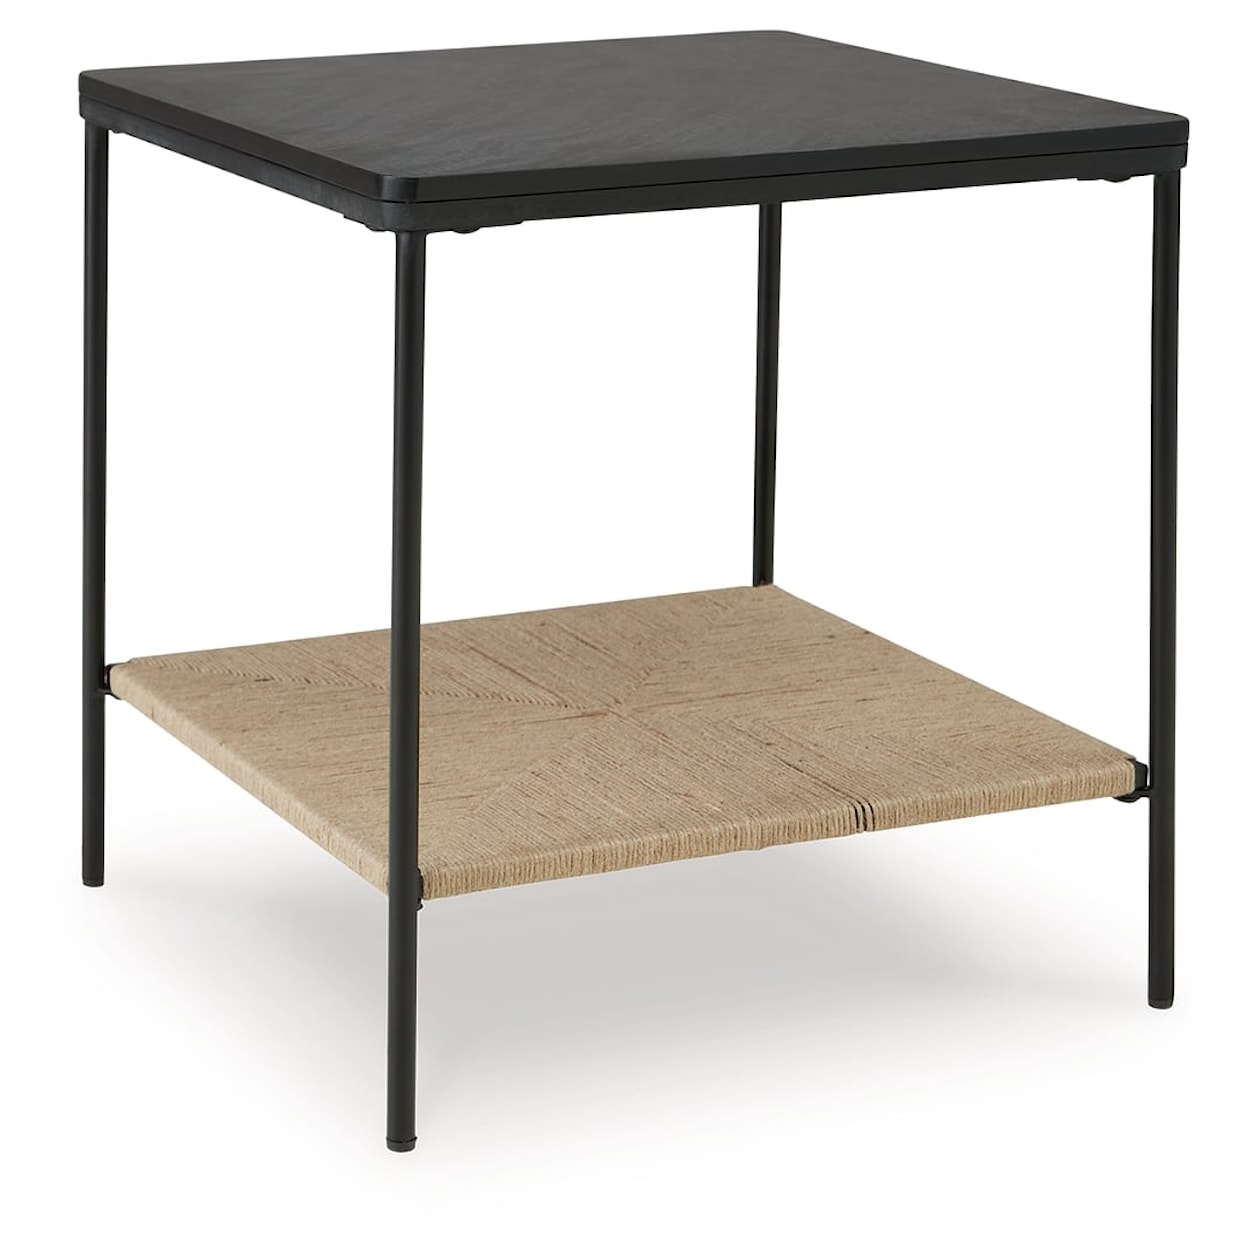 Benchcraft Minrich Accent Table